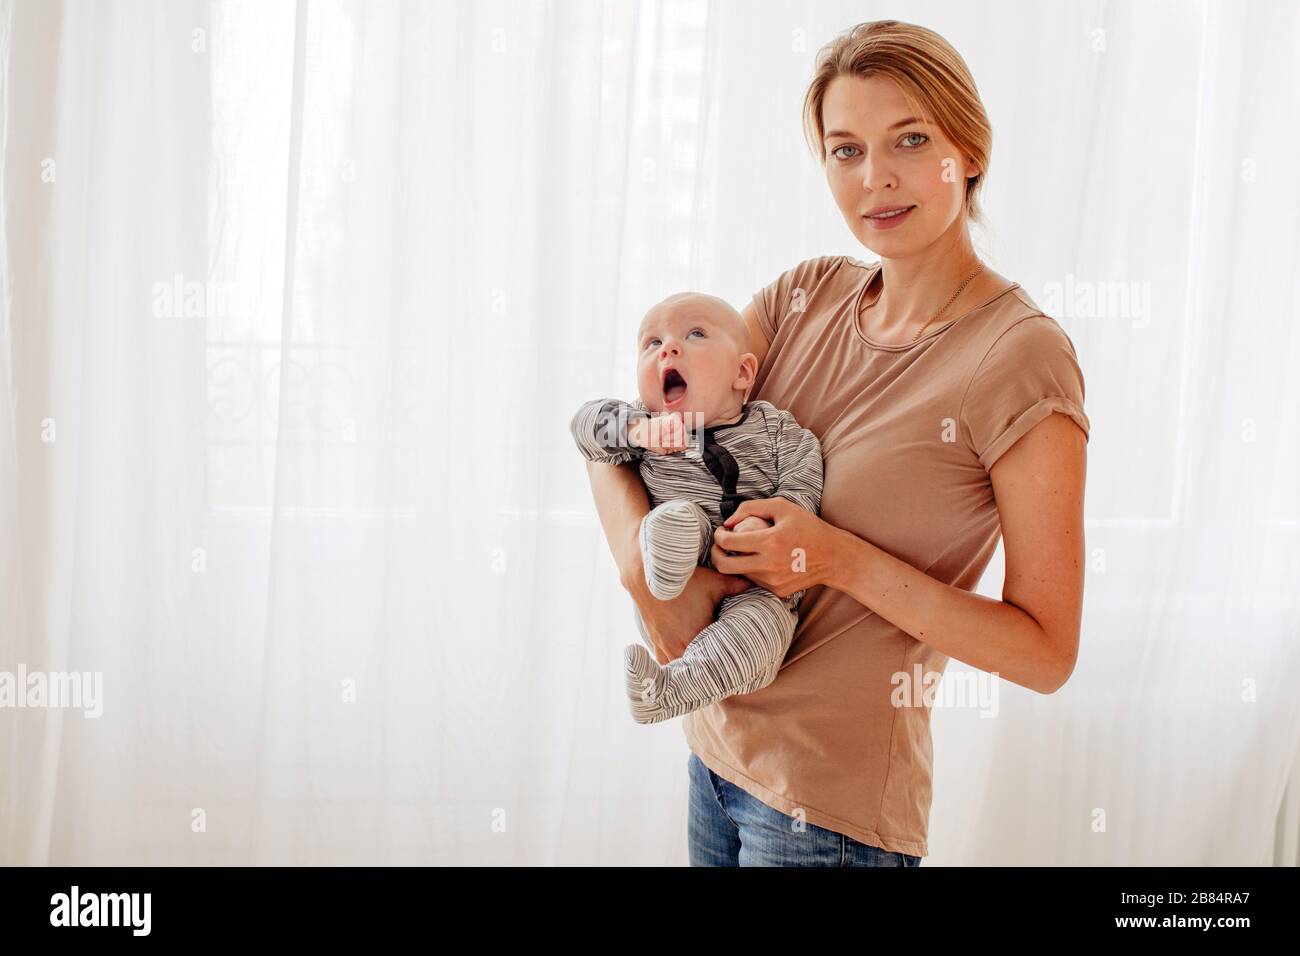 Beautiful female with cute baby Stock Photo